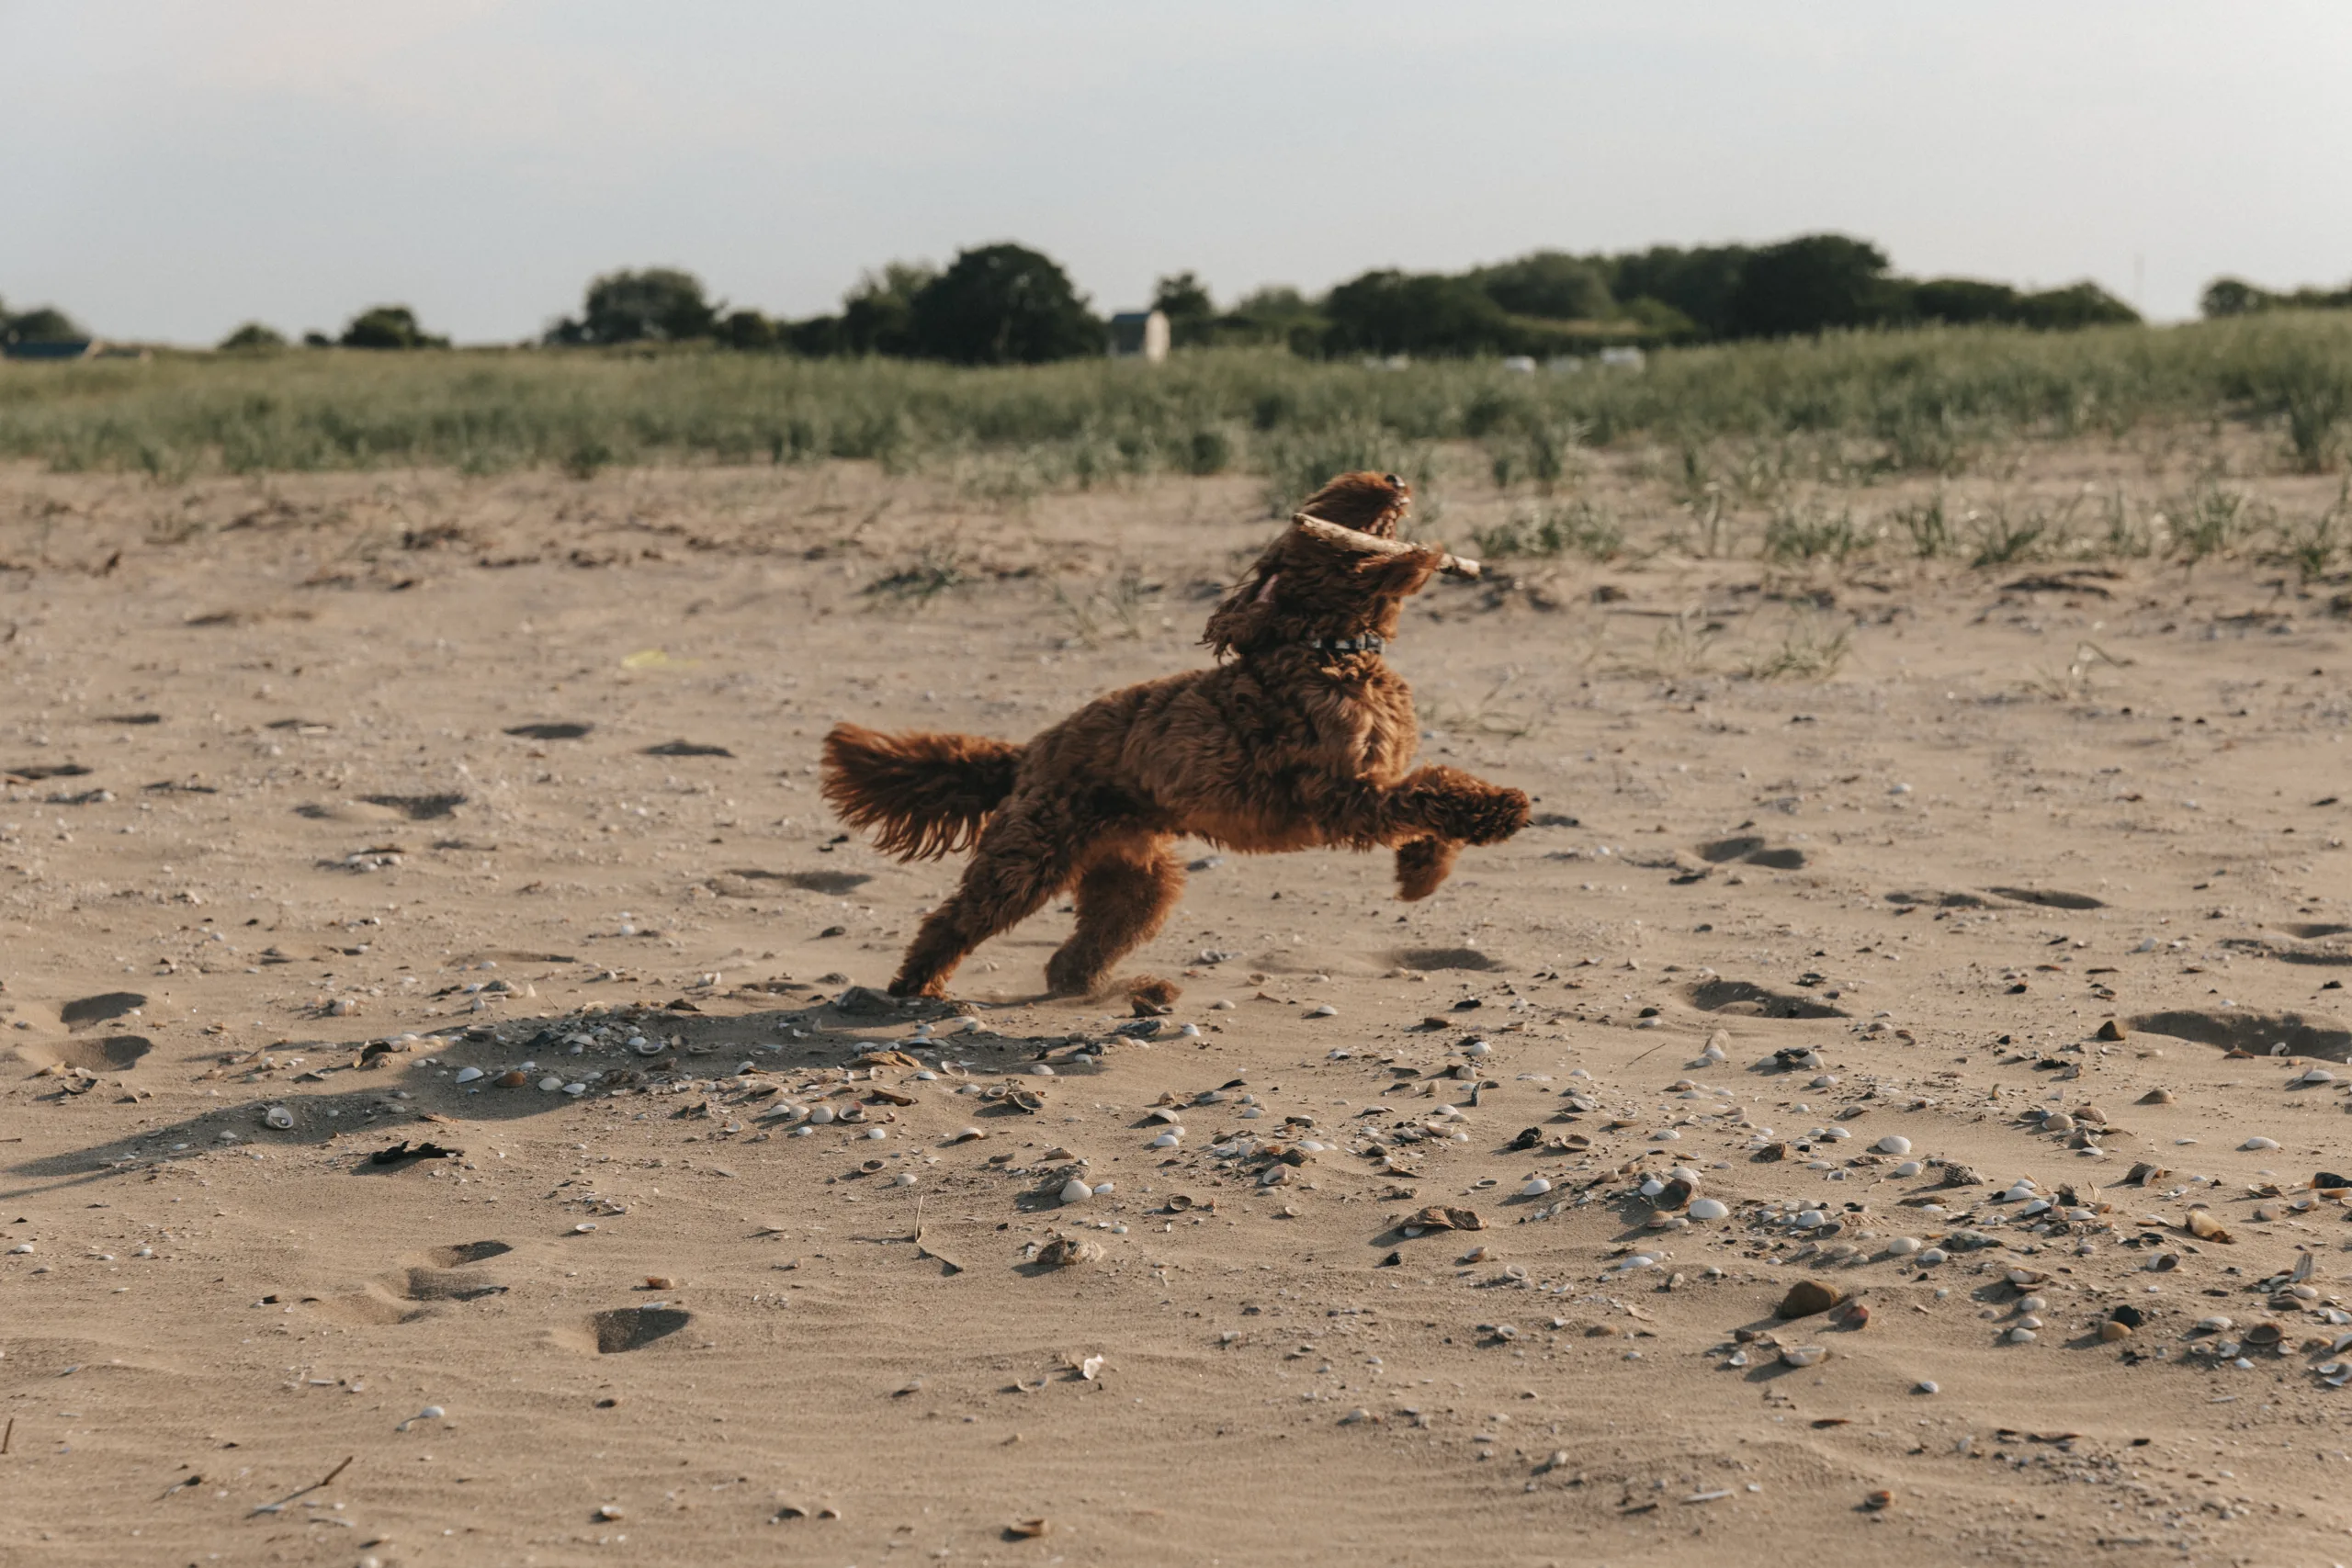 A dog is running on a sandy Yorkshire beach.